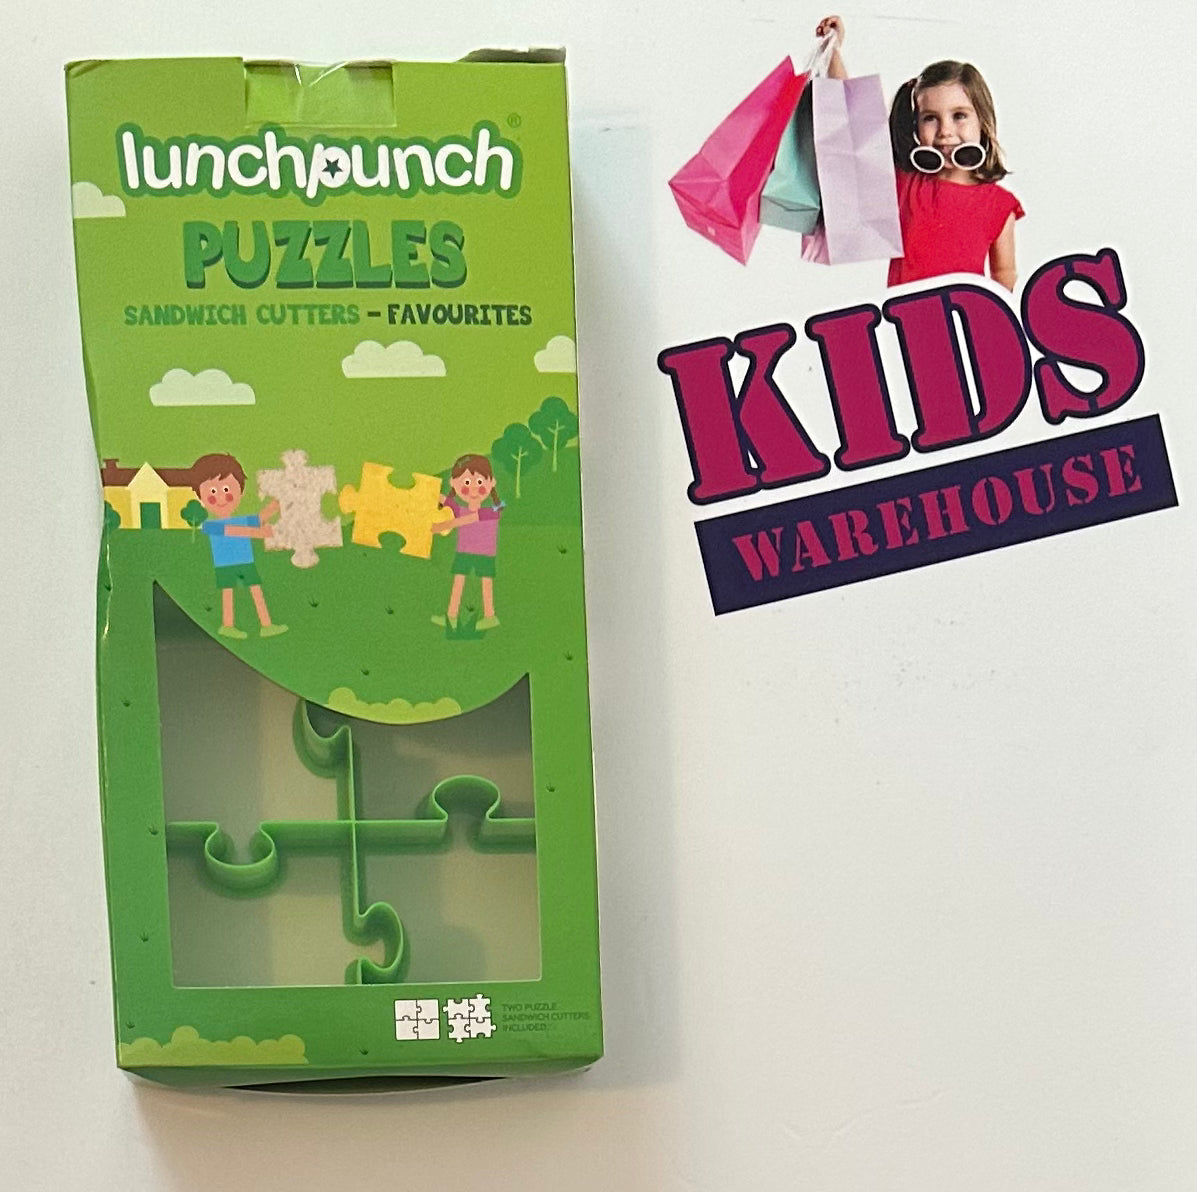 Lunch Punch Puzzles Sandwich Cutters -Favourites